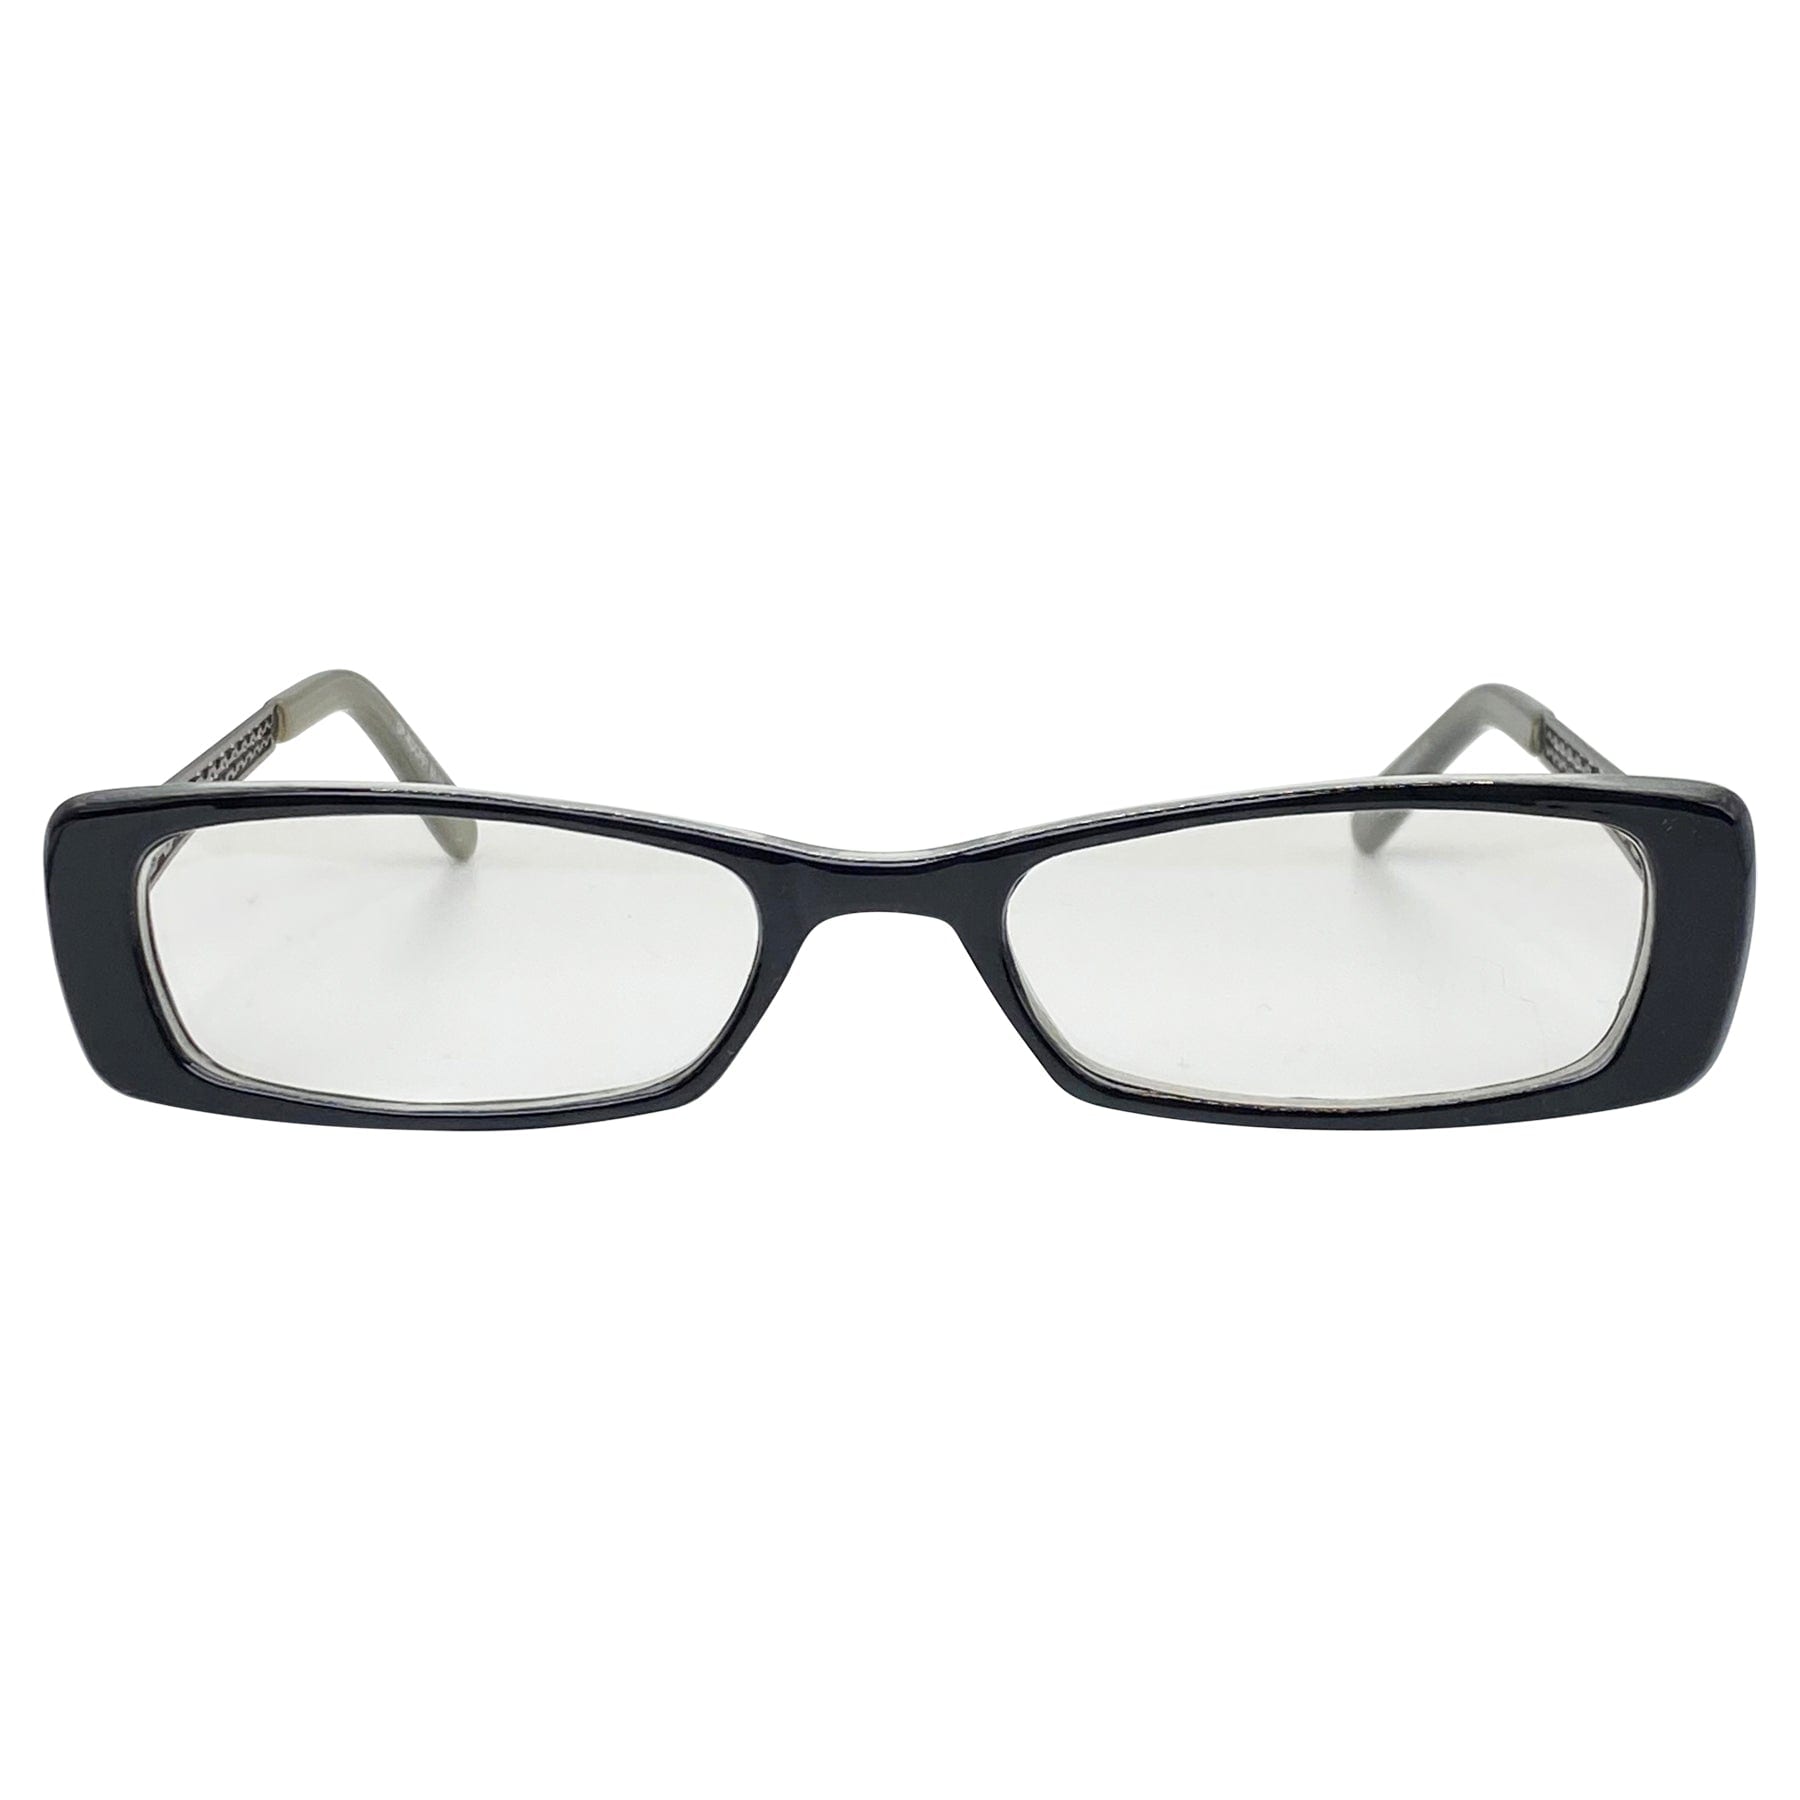 90s clear glasses women and unisex bayonetta style trend